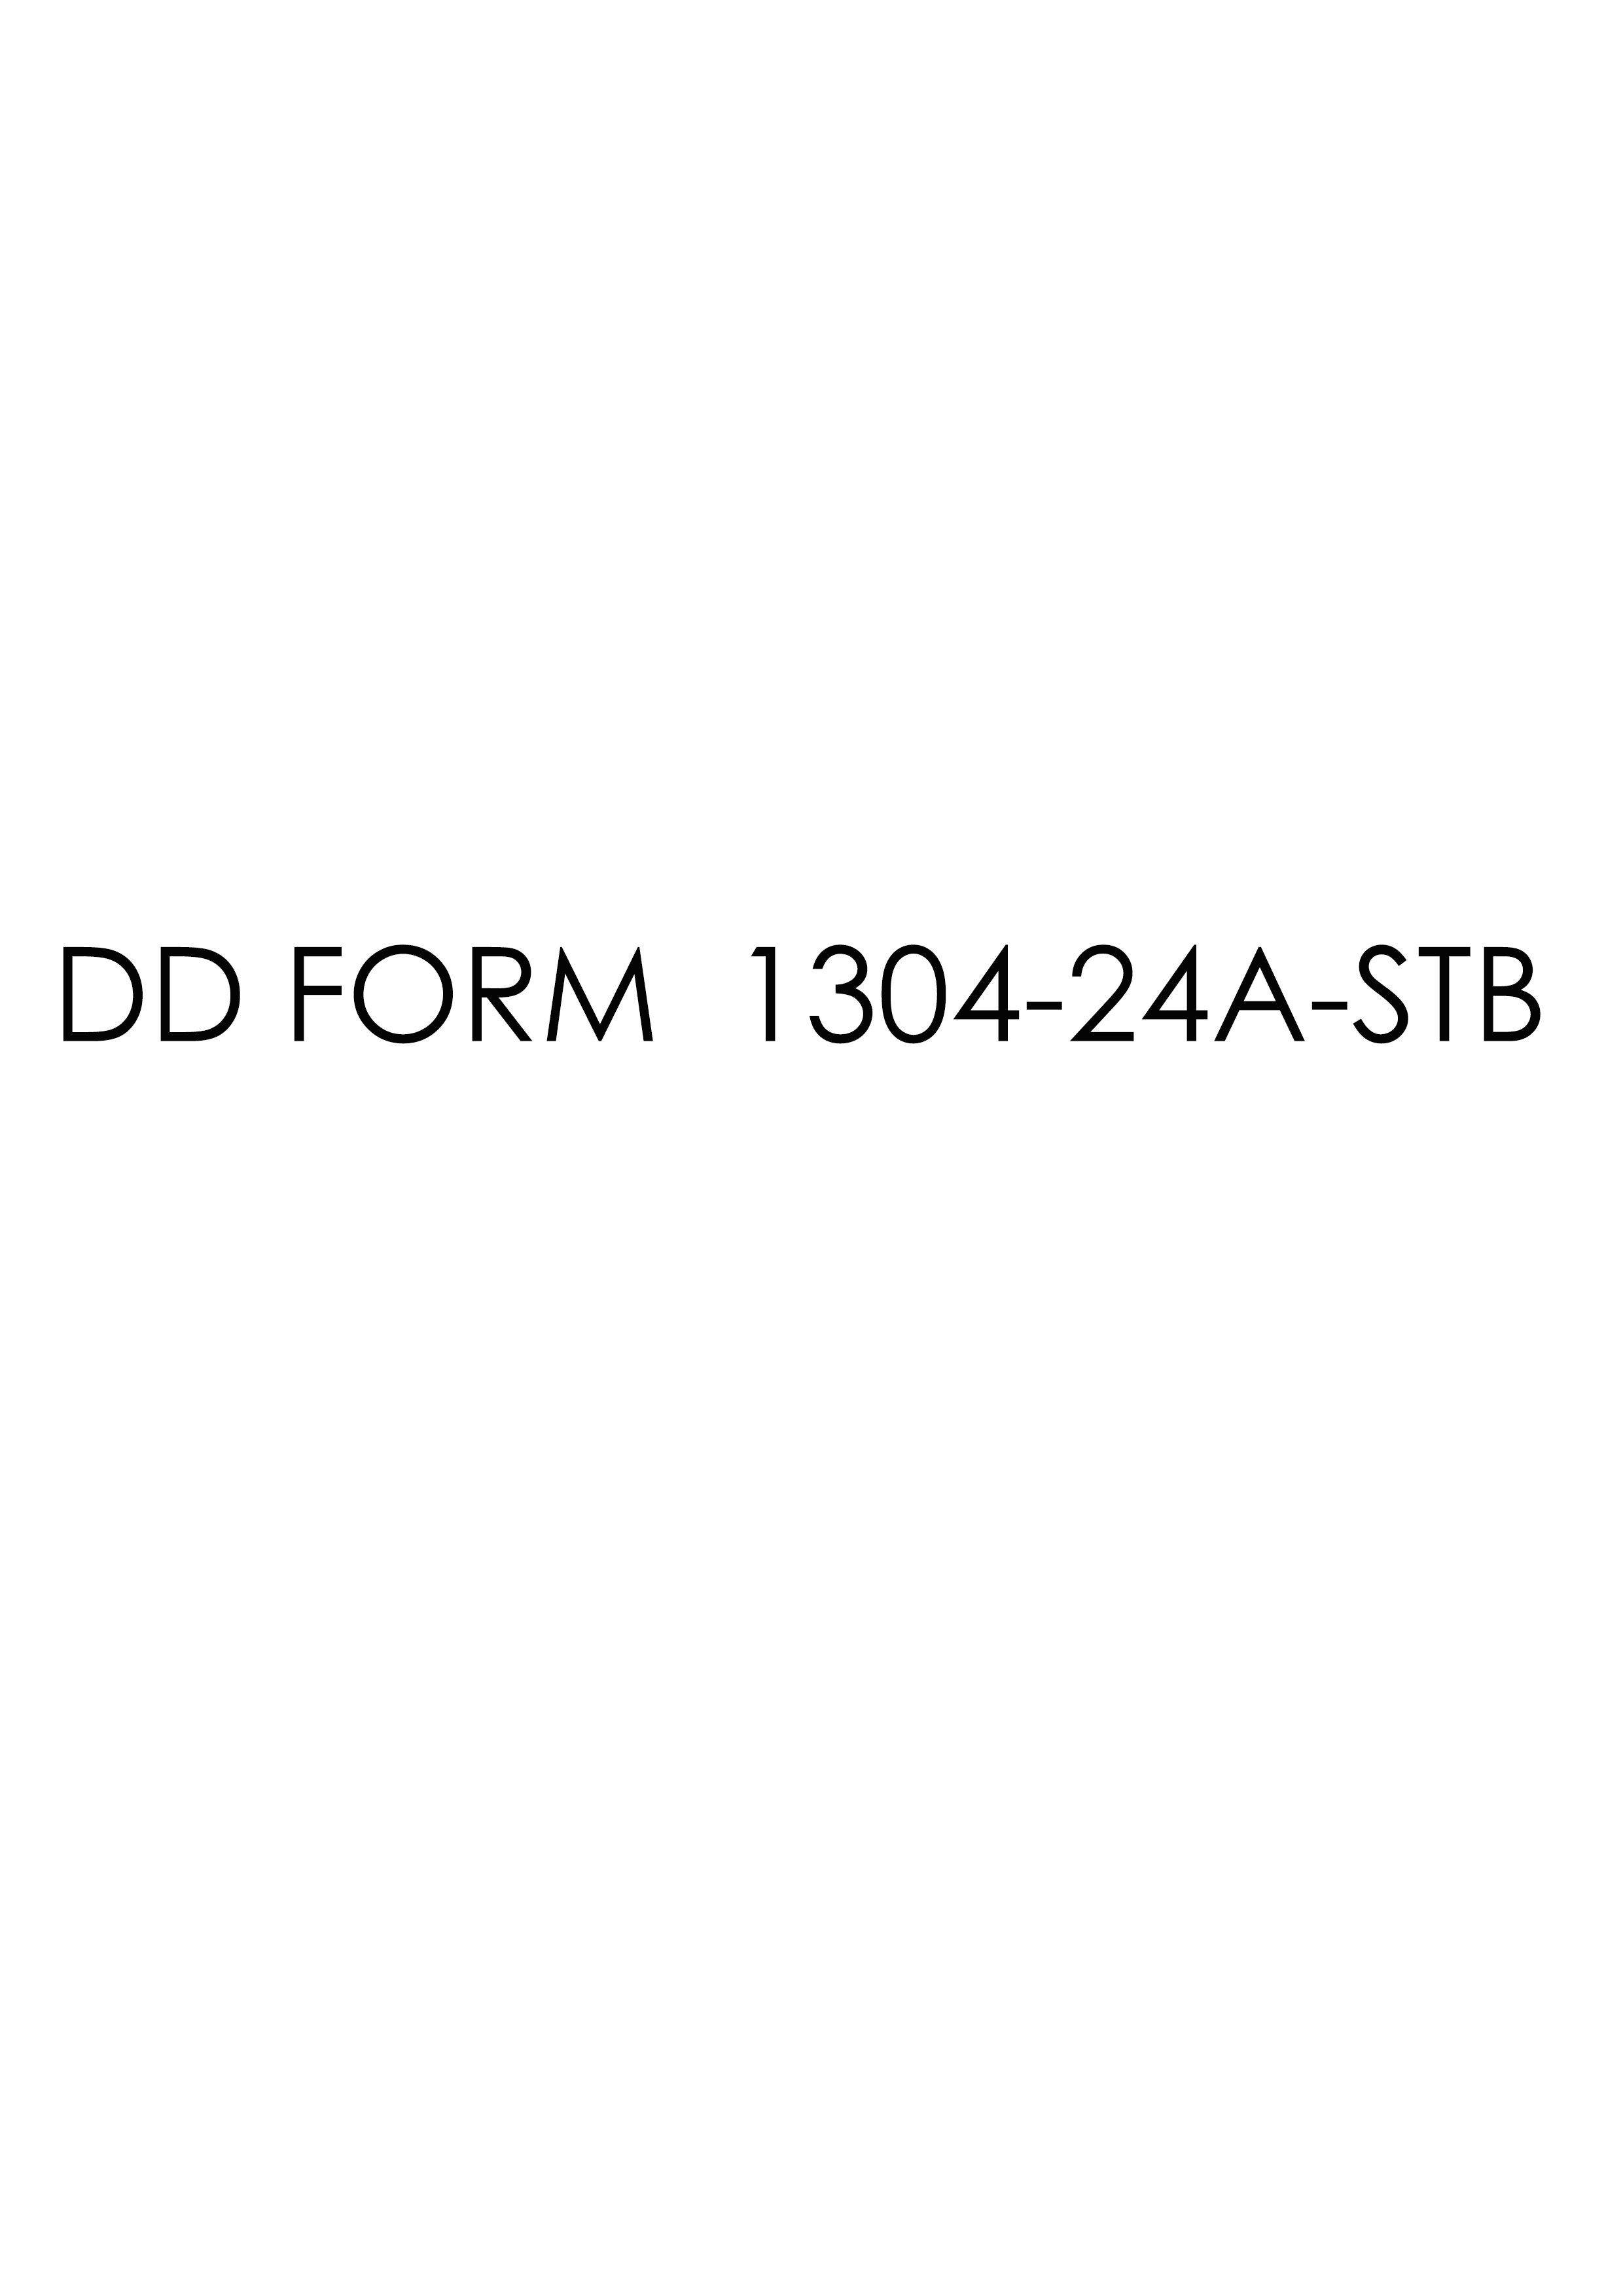 Download Fillable dd Form 1304-24A-STB